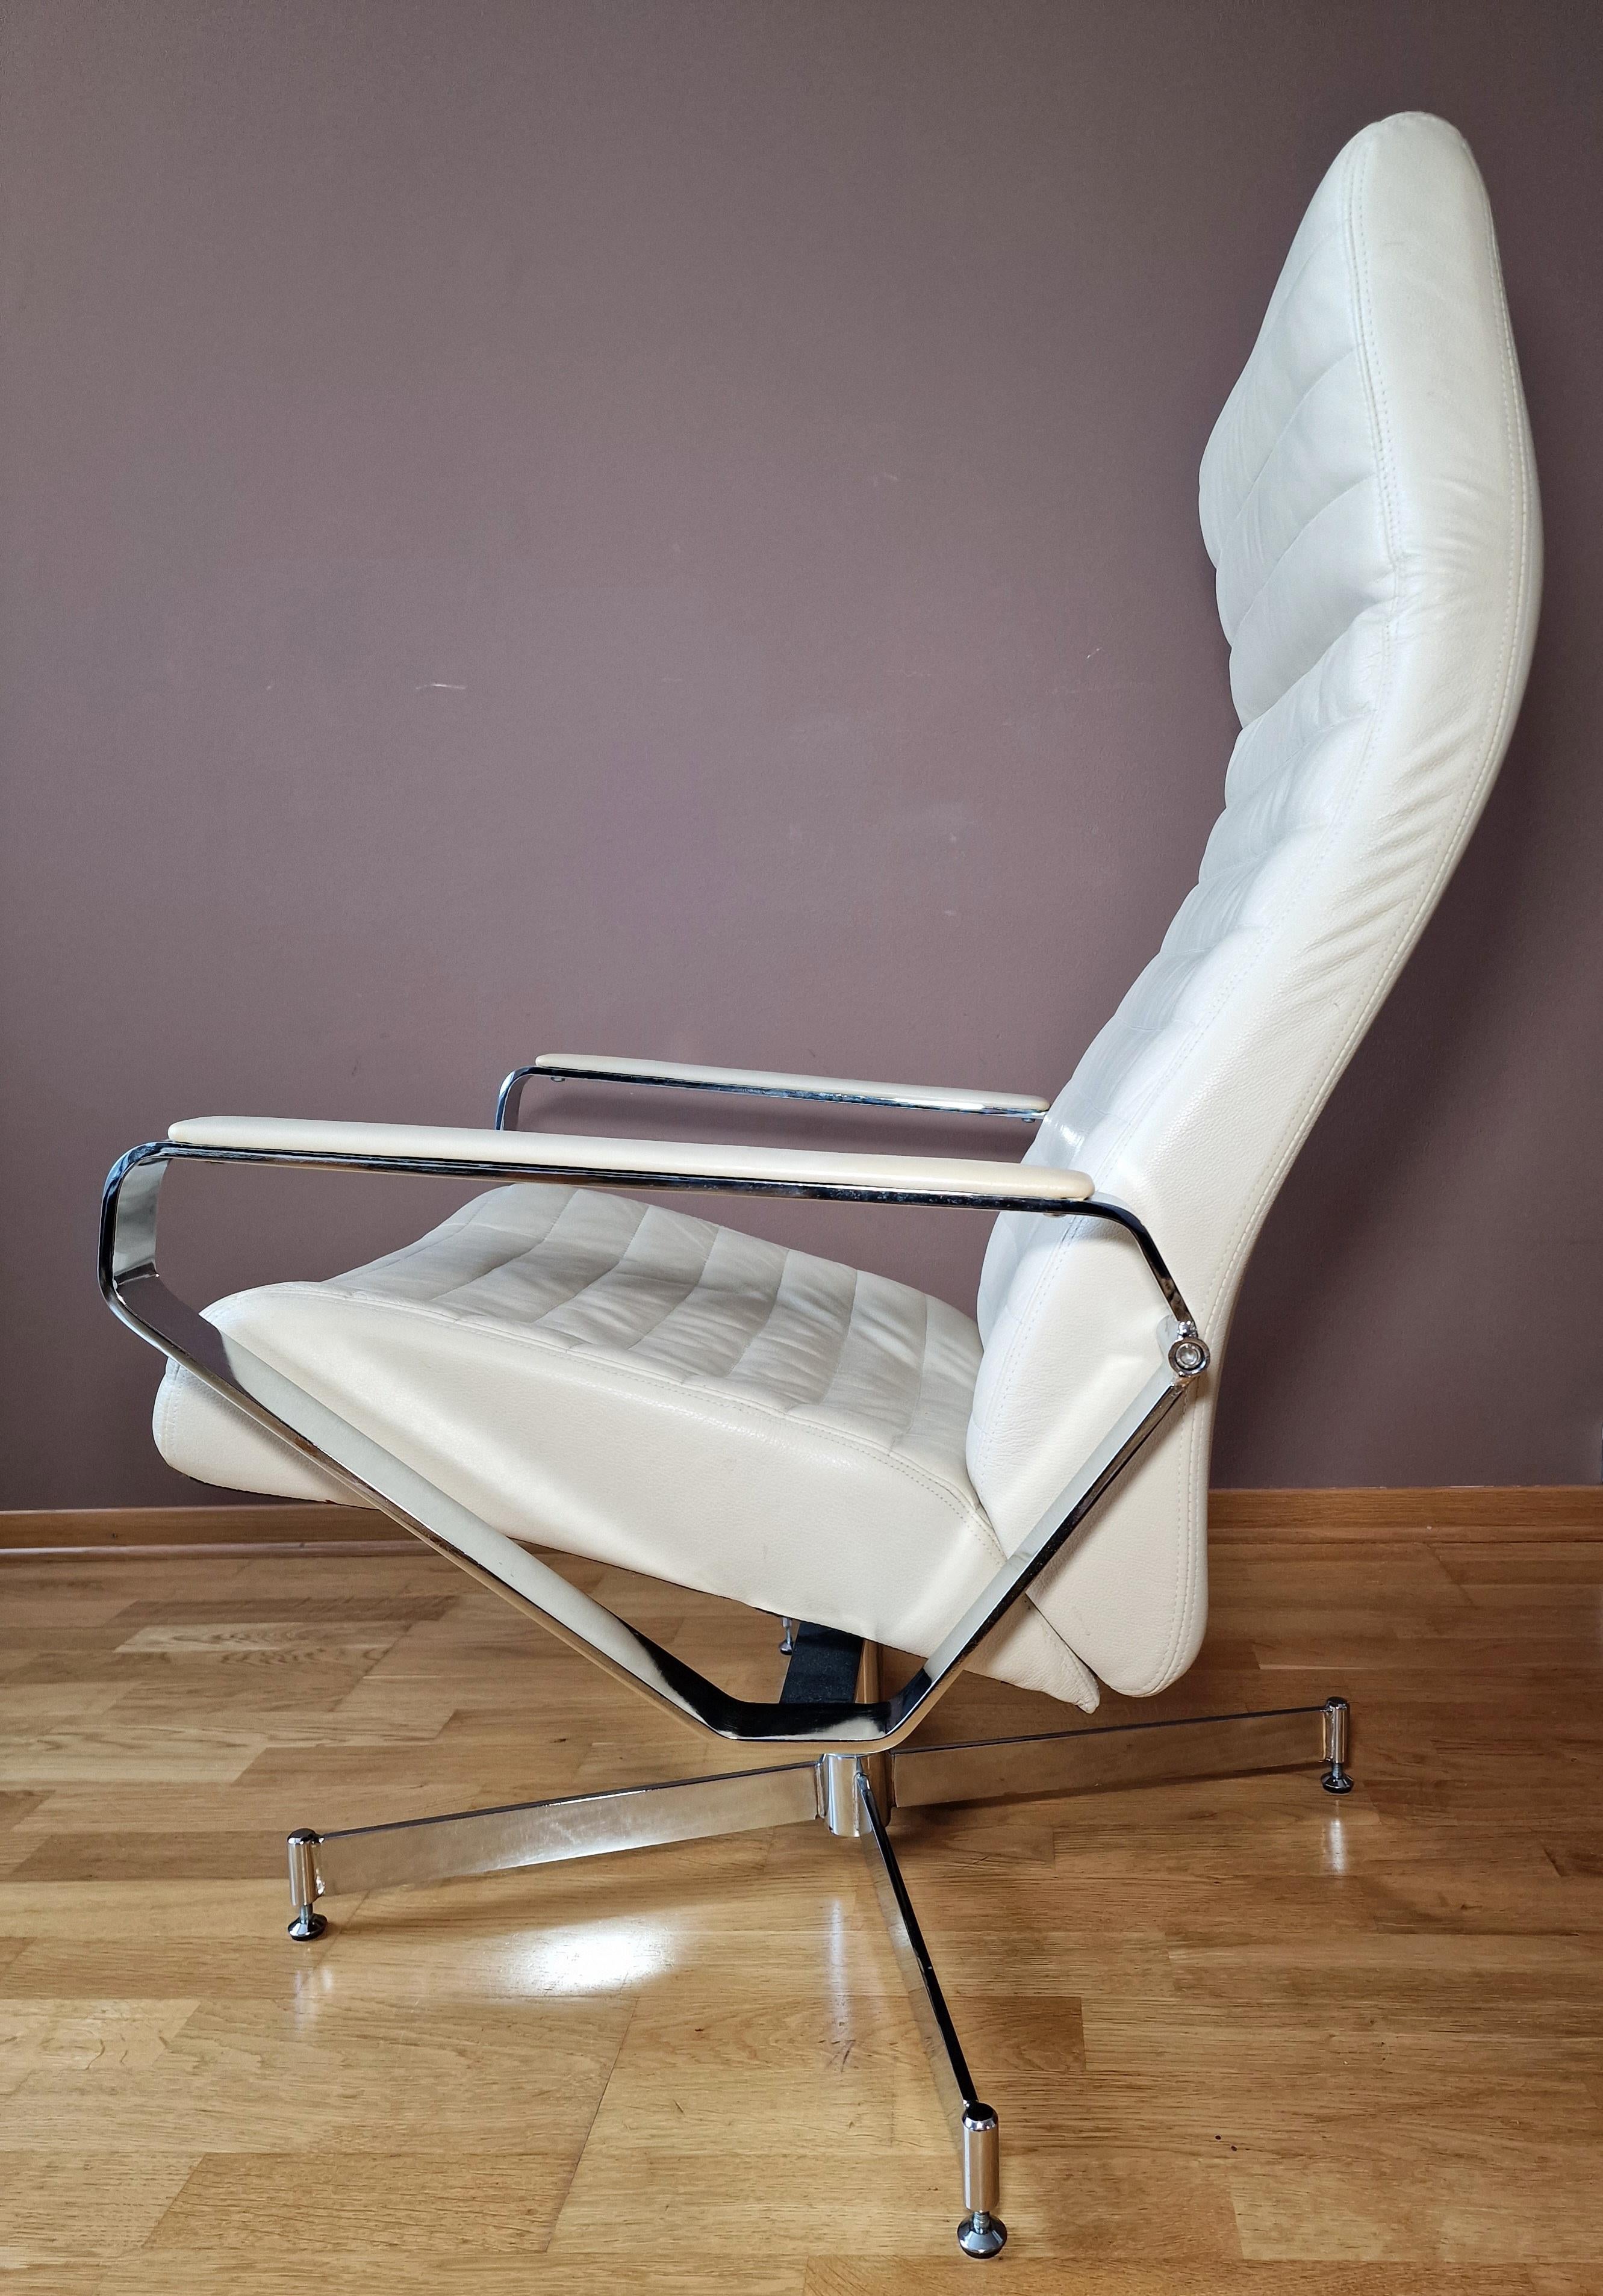 Really comfortable chair to sit made of leather ,has a lot of adjustments!
Rotates 360.
Chair is in good condition.